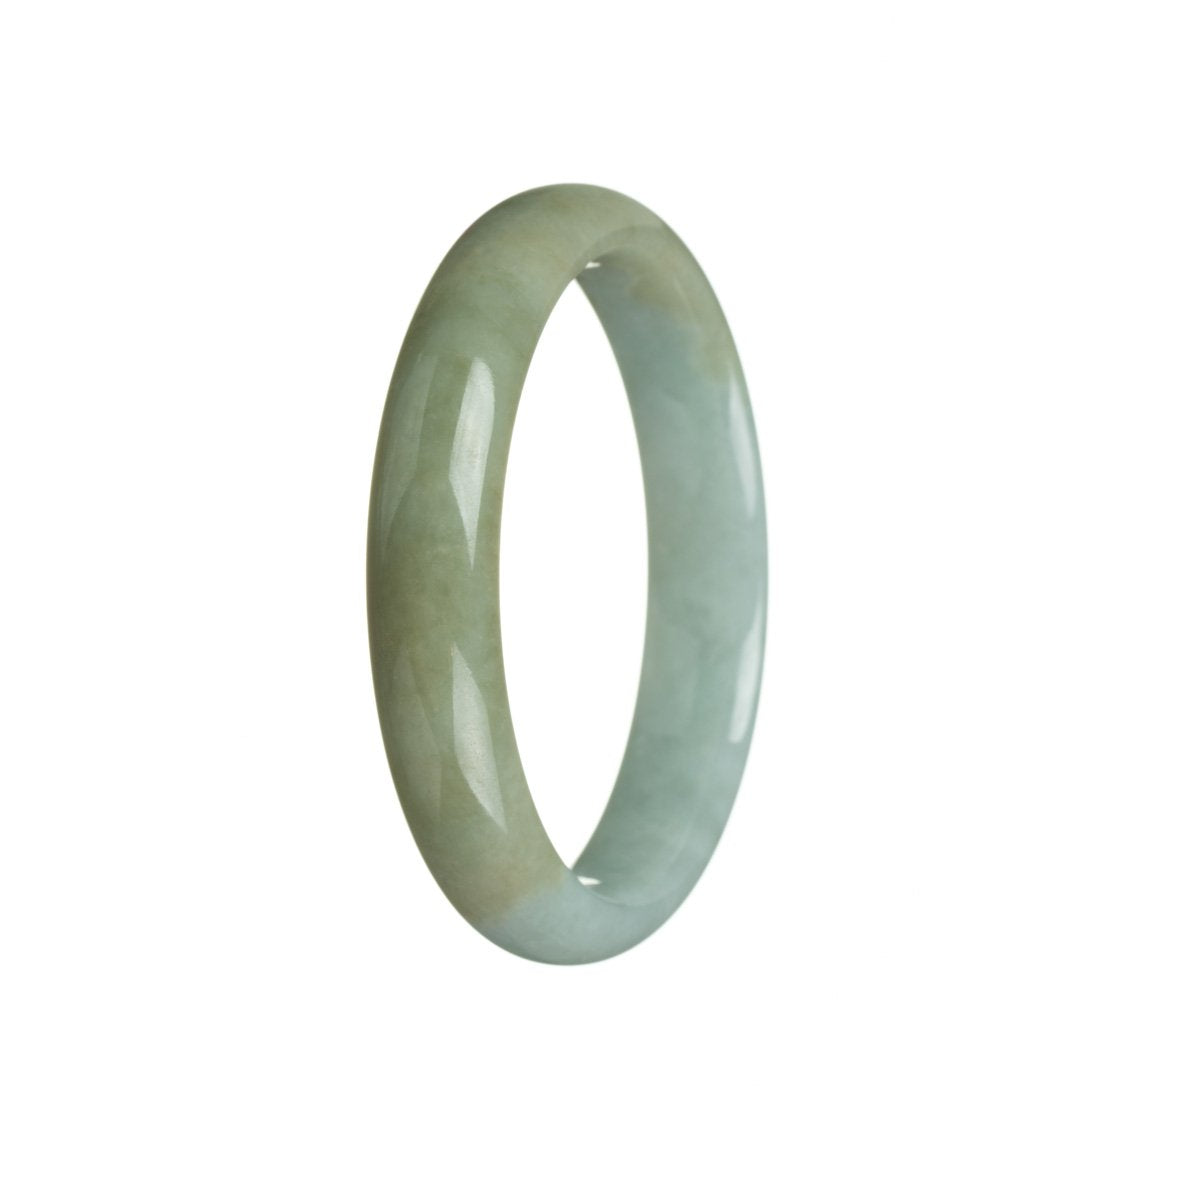 A beautiful jade bracelet with a half moon design in shades of real natural green and brownish green.